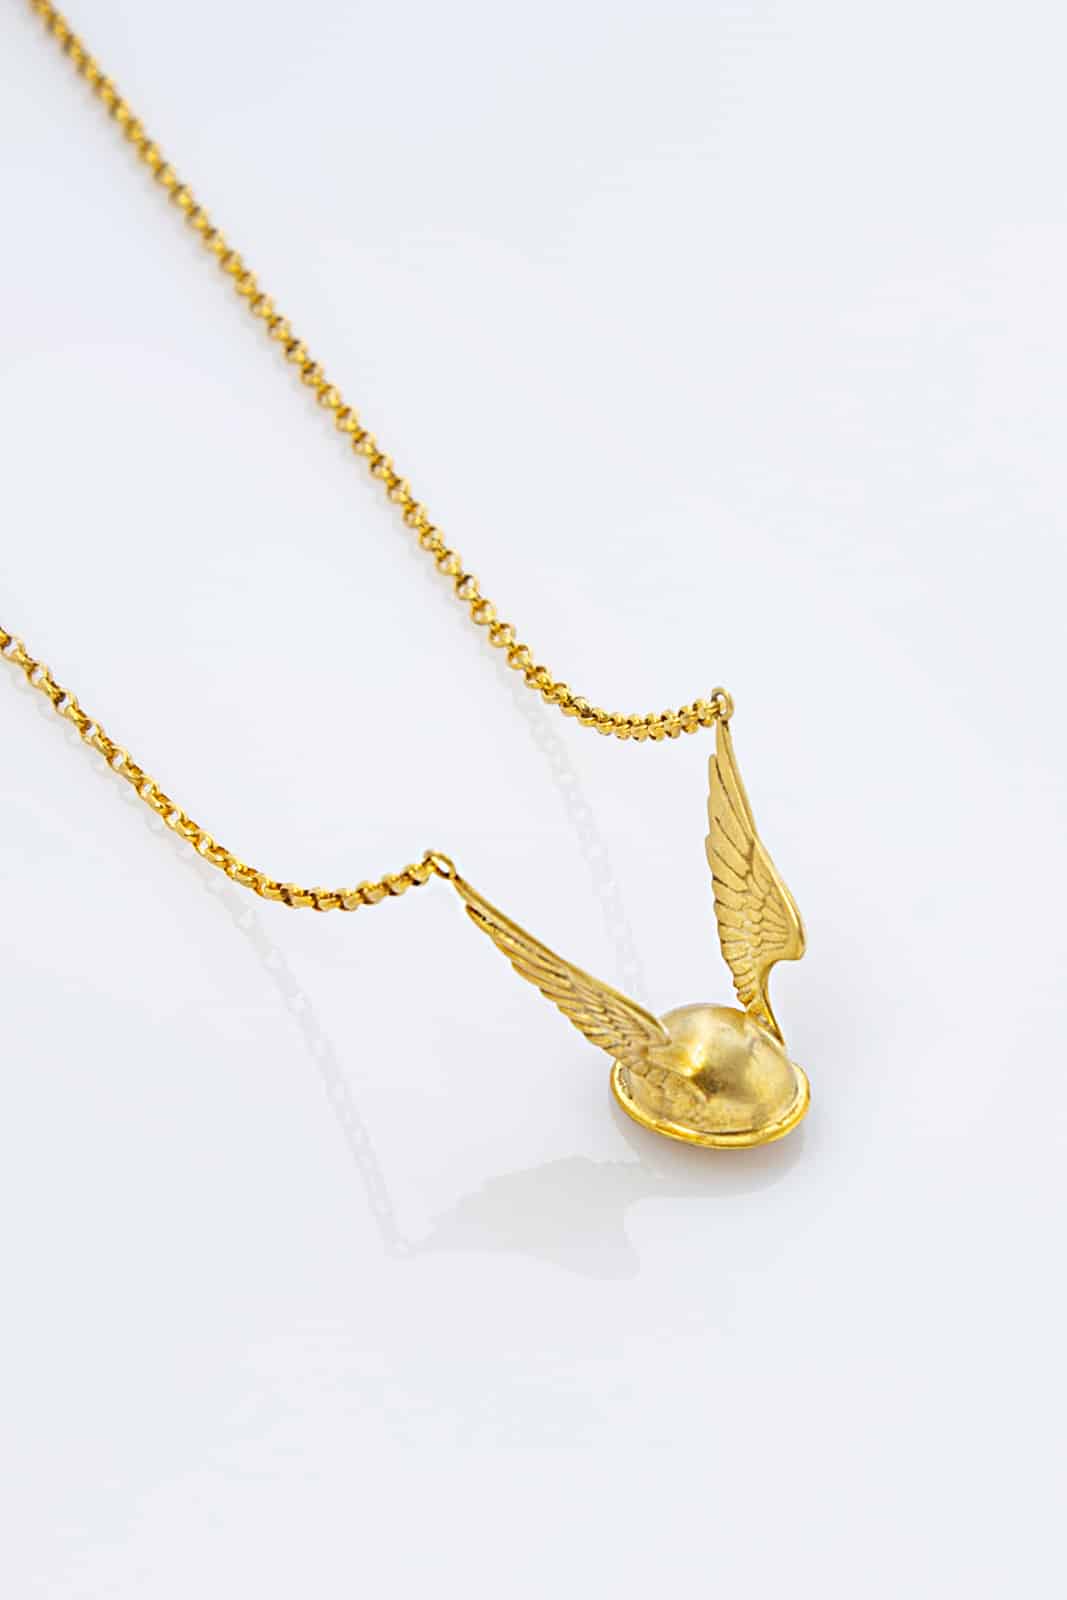 HERMES HAT NECKLACE GOLD PLATED